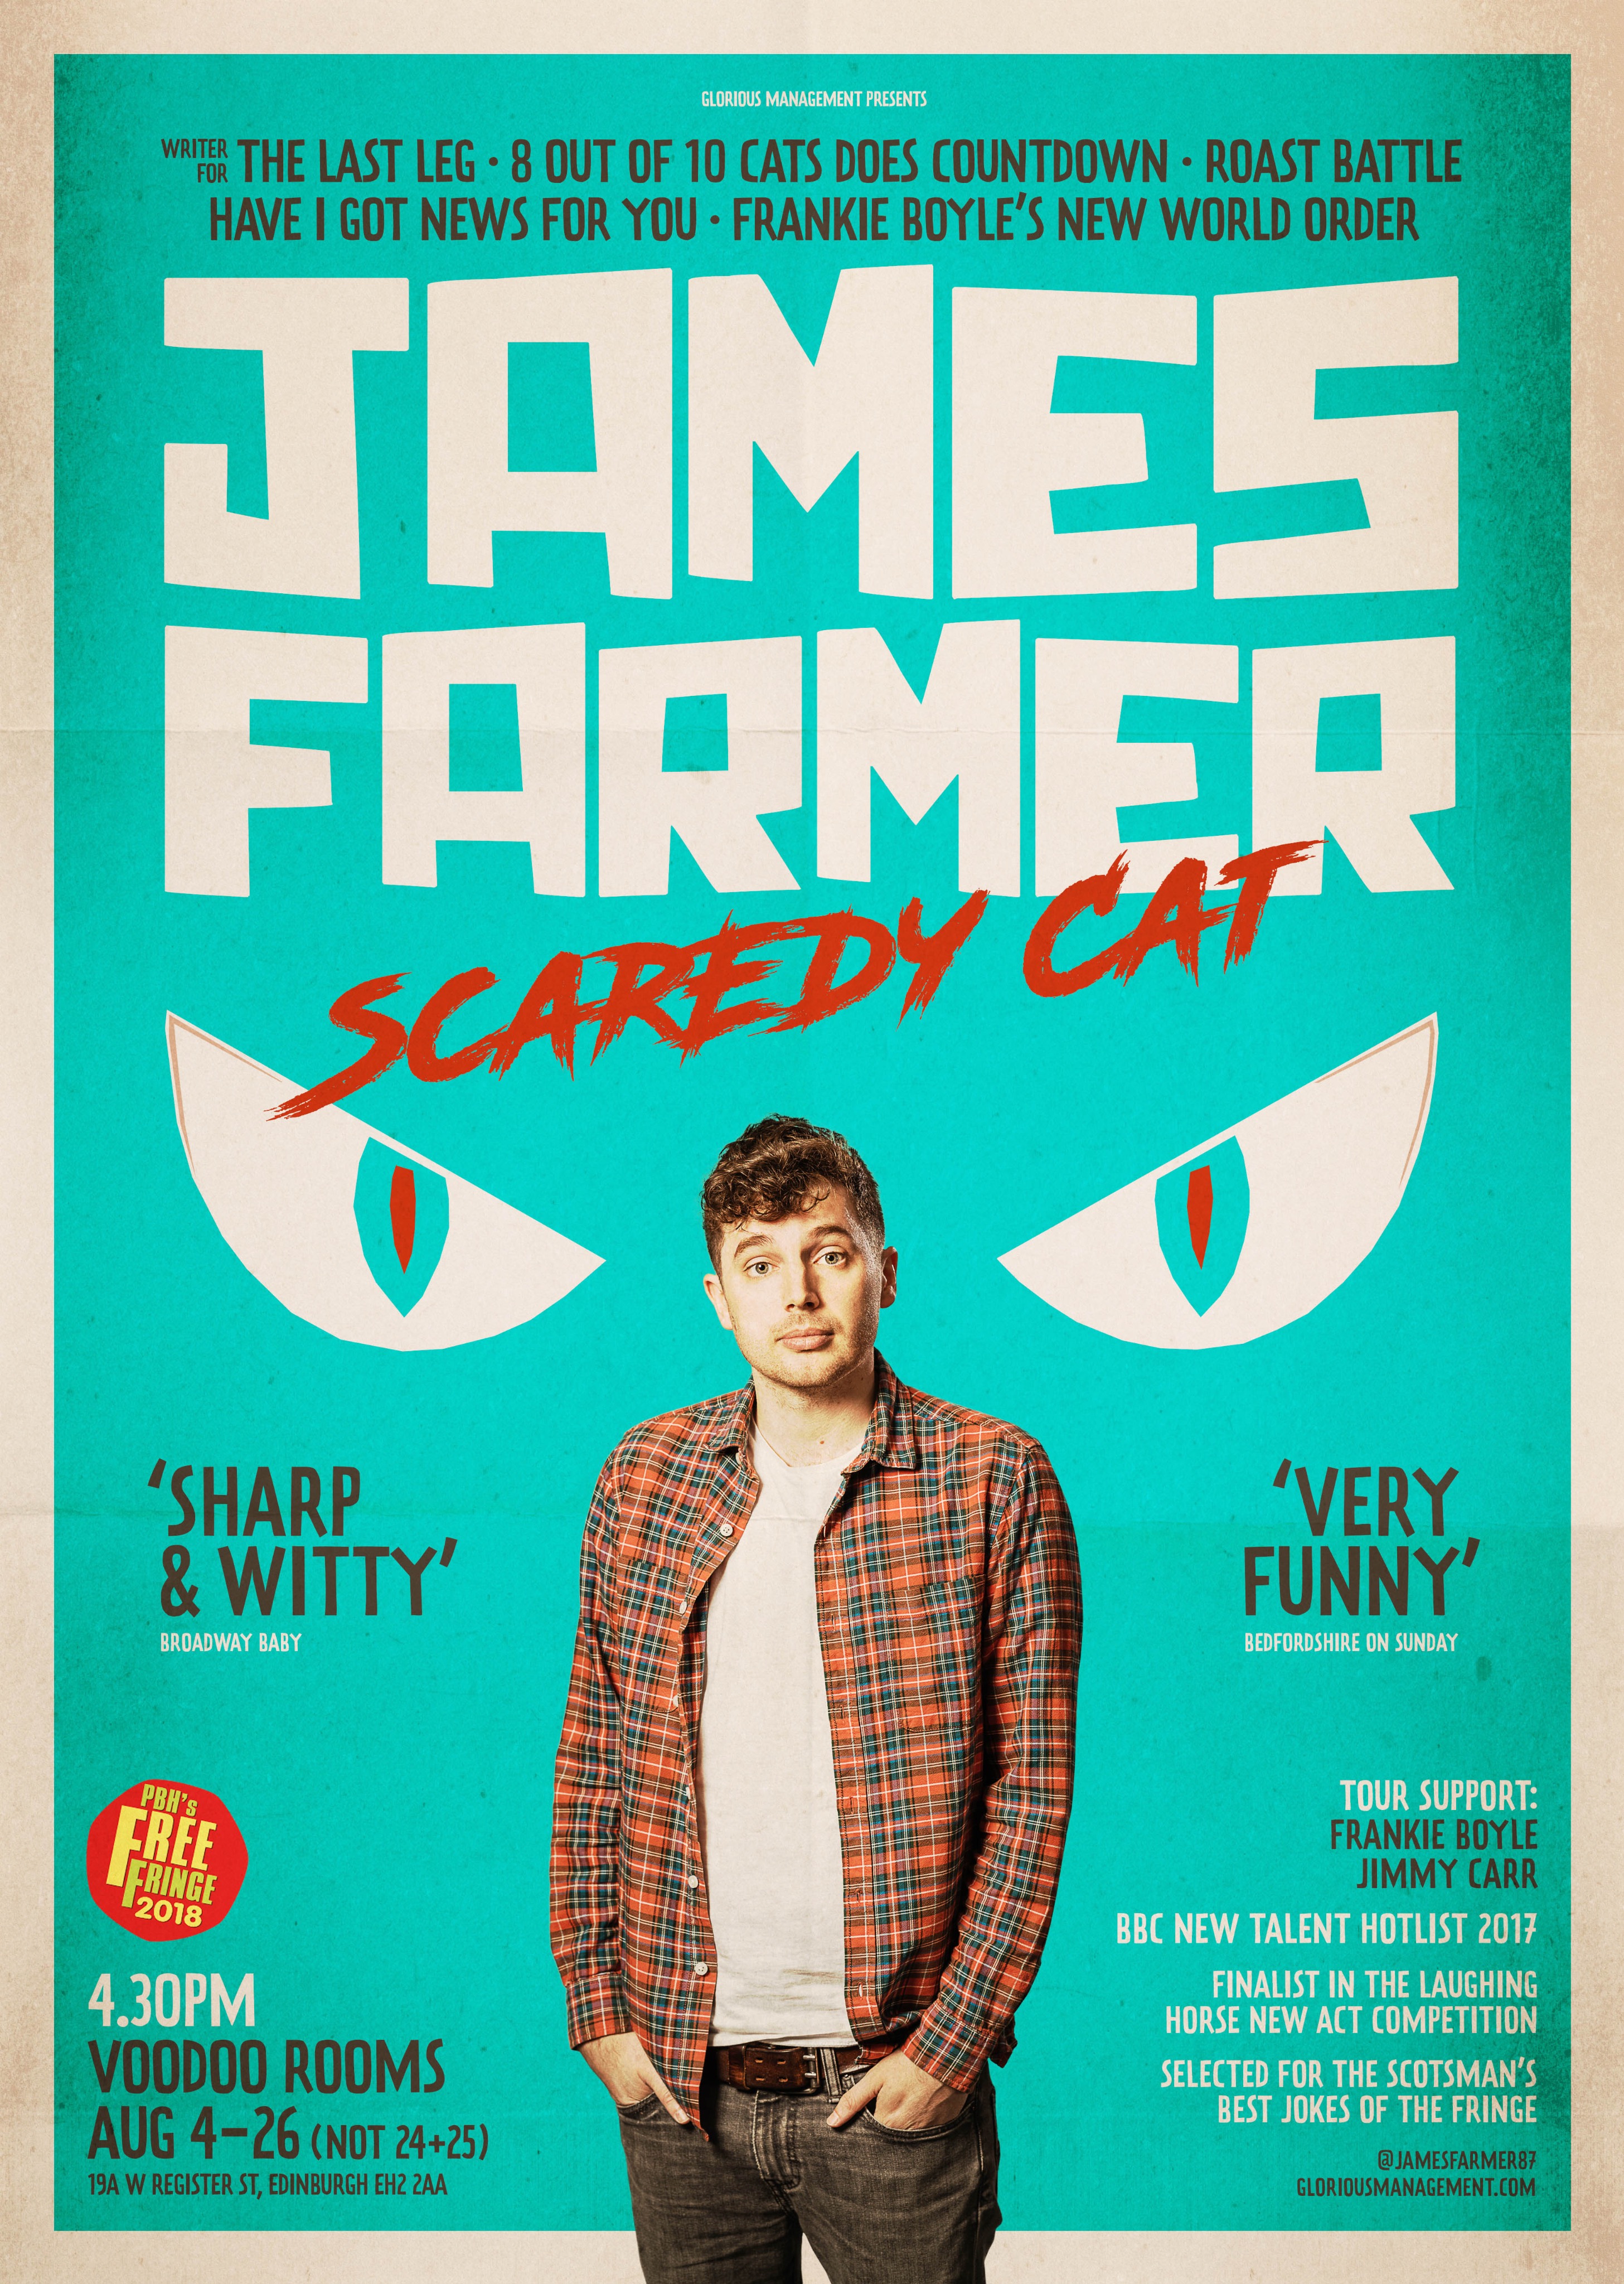 The poster for James Farmer - Scaredy Cat